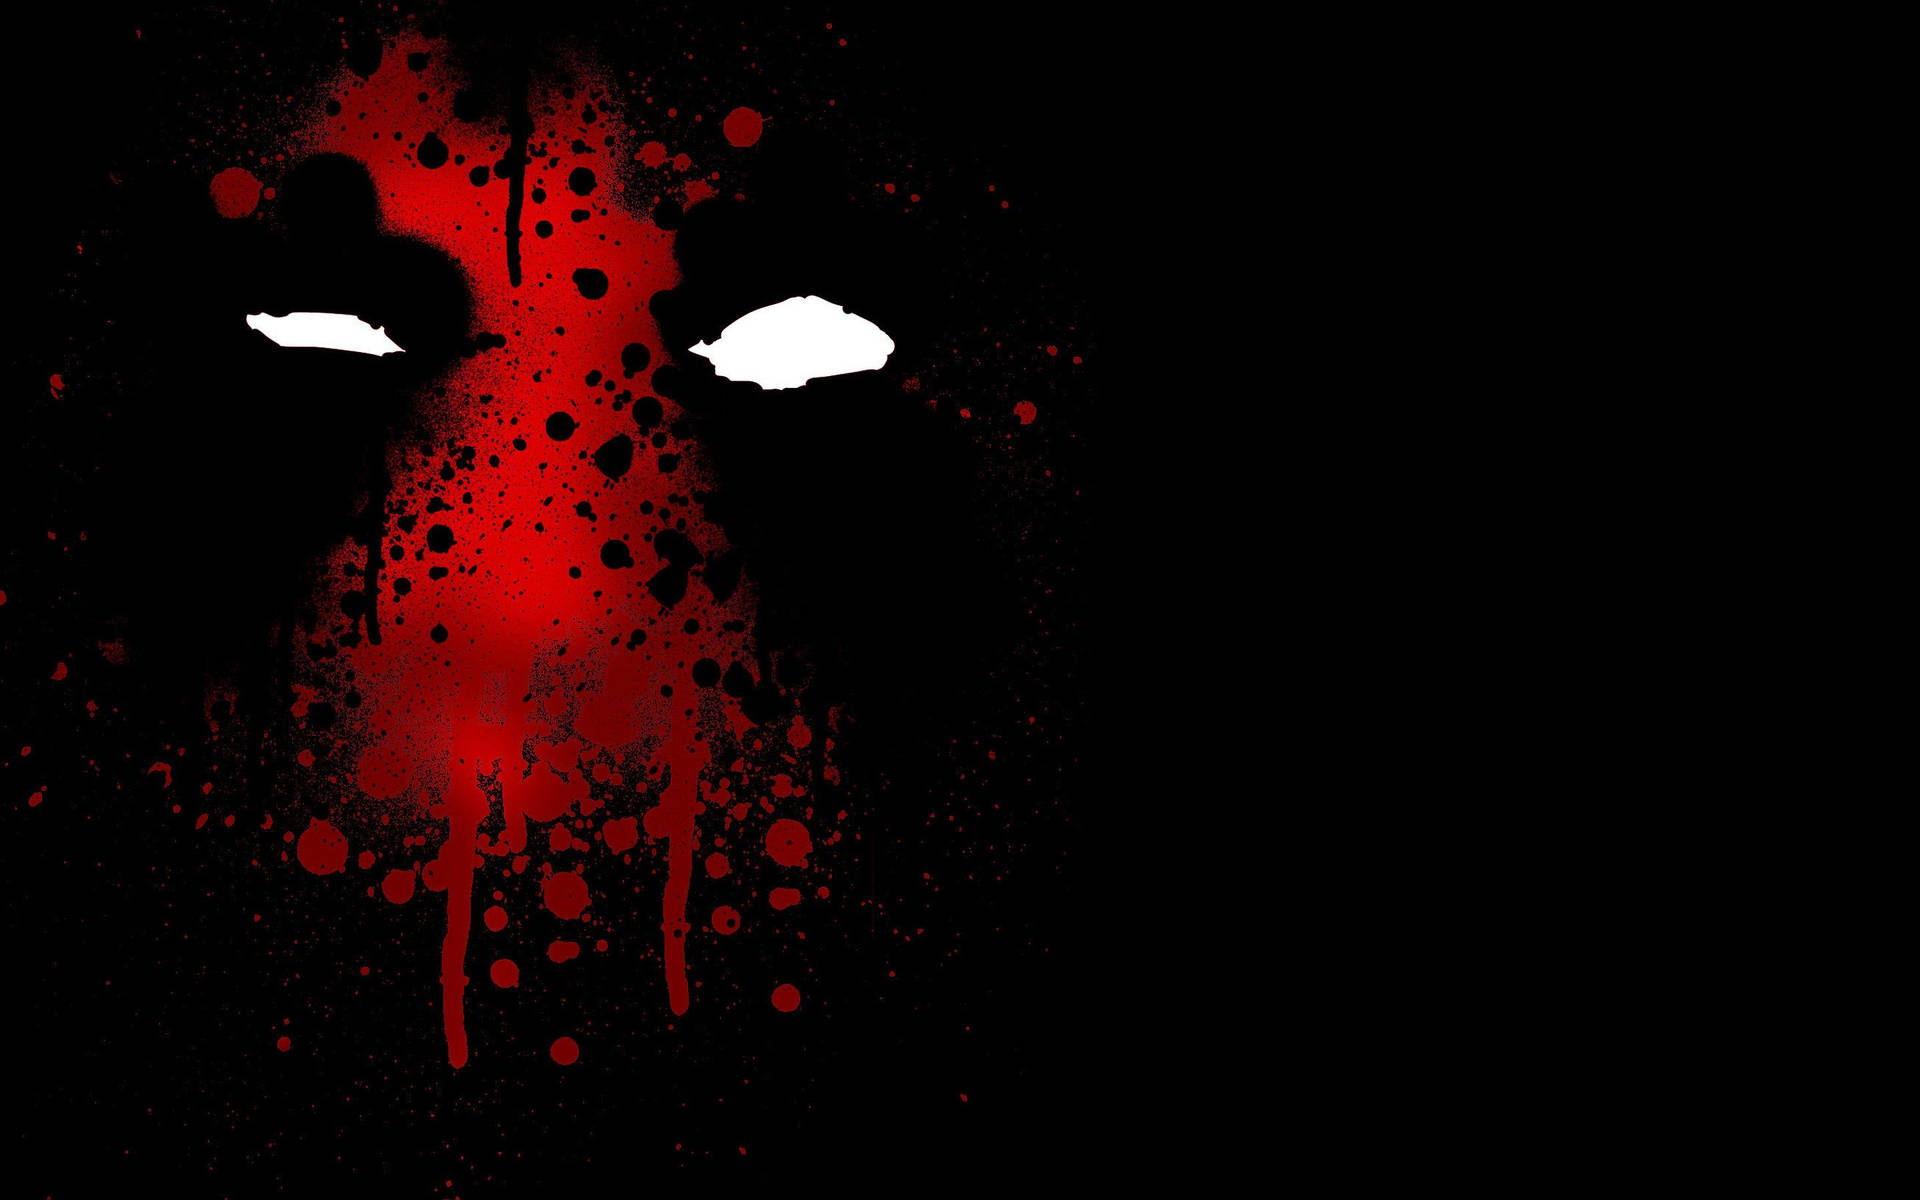 Deadpool In Red Spray Paint Texture Wallpaper